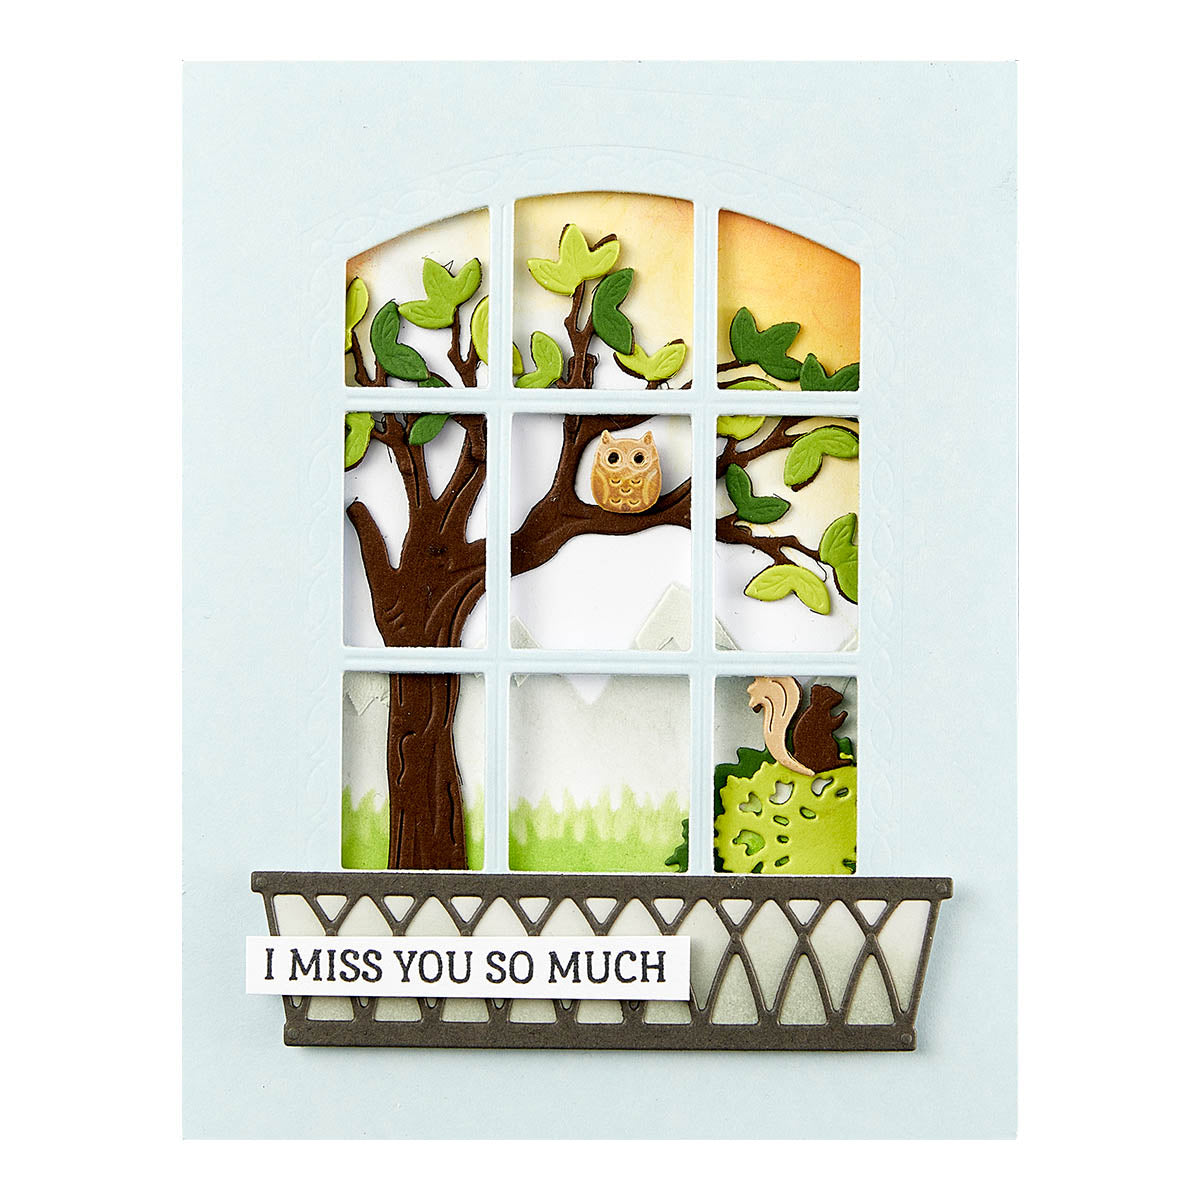 Spellbinders - Backyard Haven View Etched Dies from the Windows with a View Collection by Tina Smith